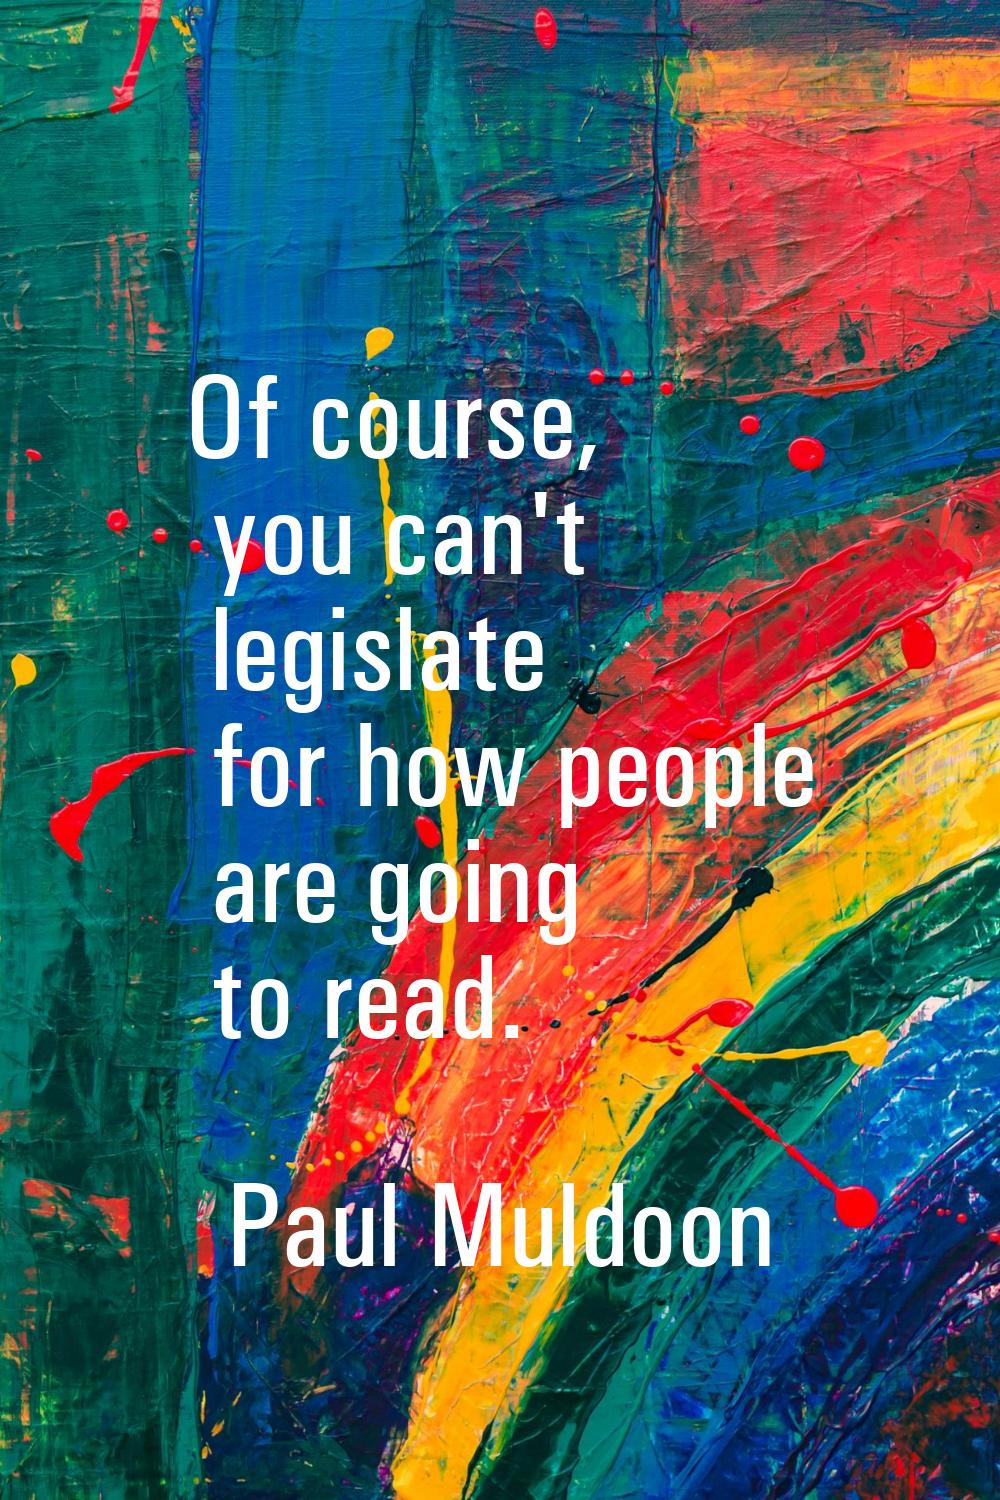 Of course, you can't legislate for how people are going to read.